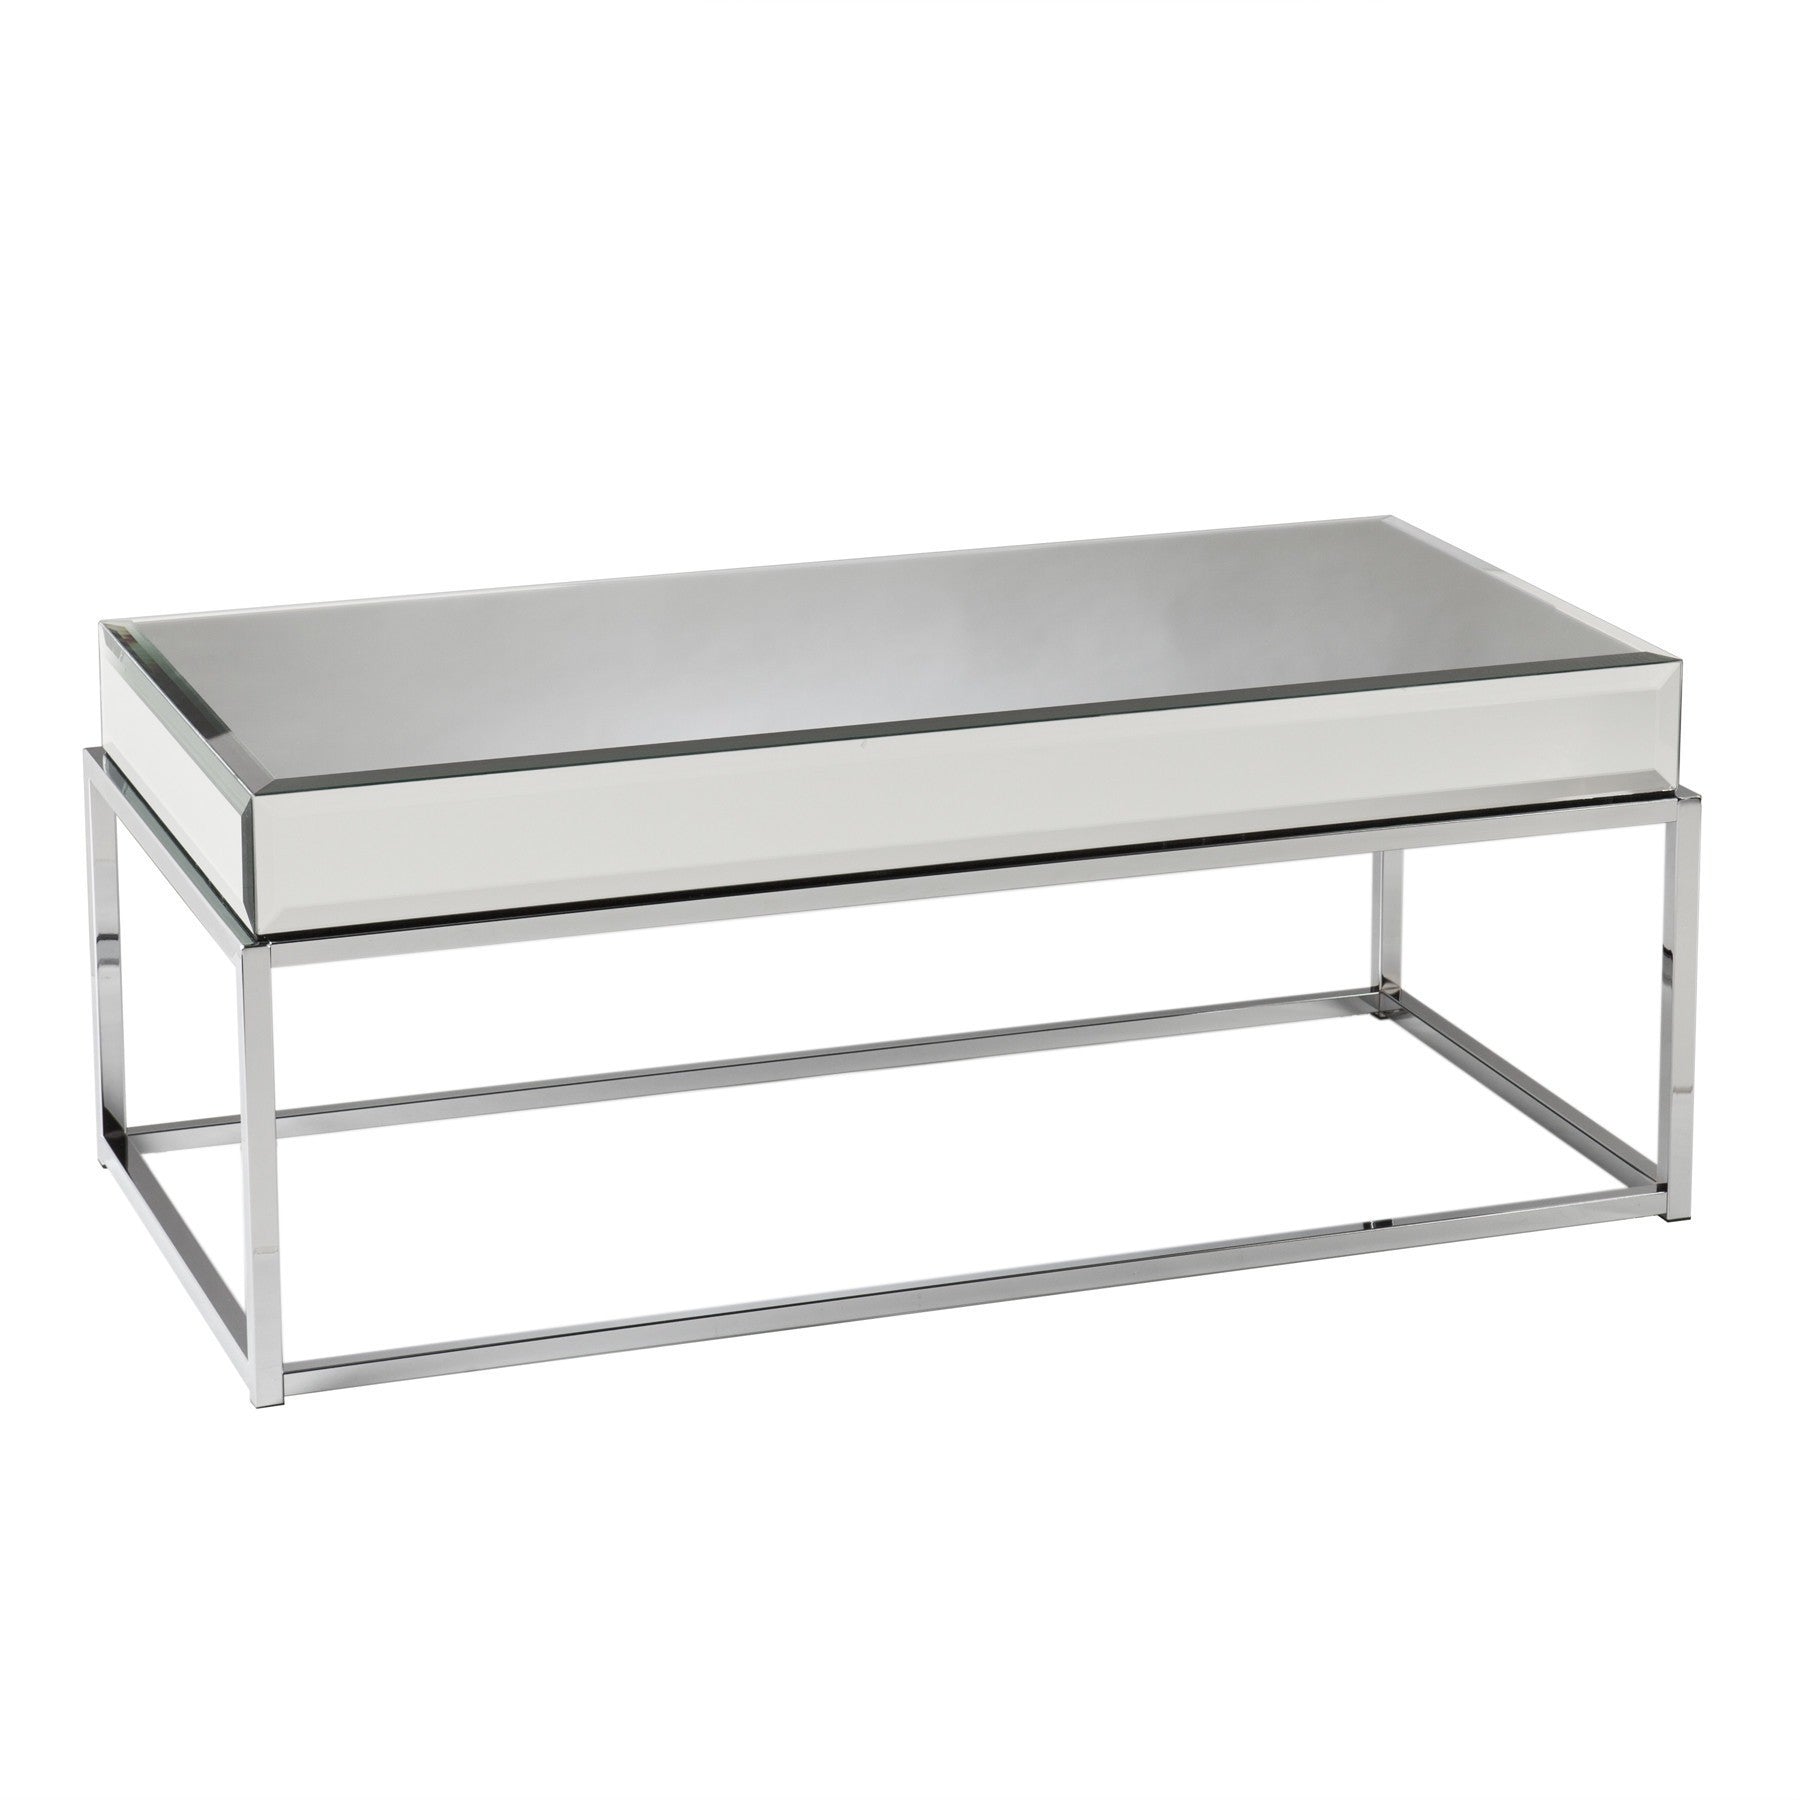 Kyla Mirrored Coffee Table By Wildon Home Coffee Table Direct